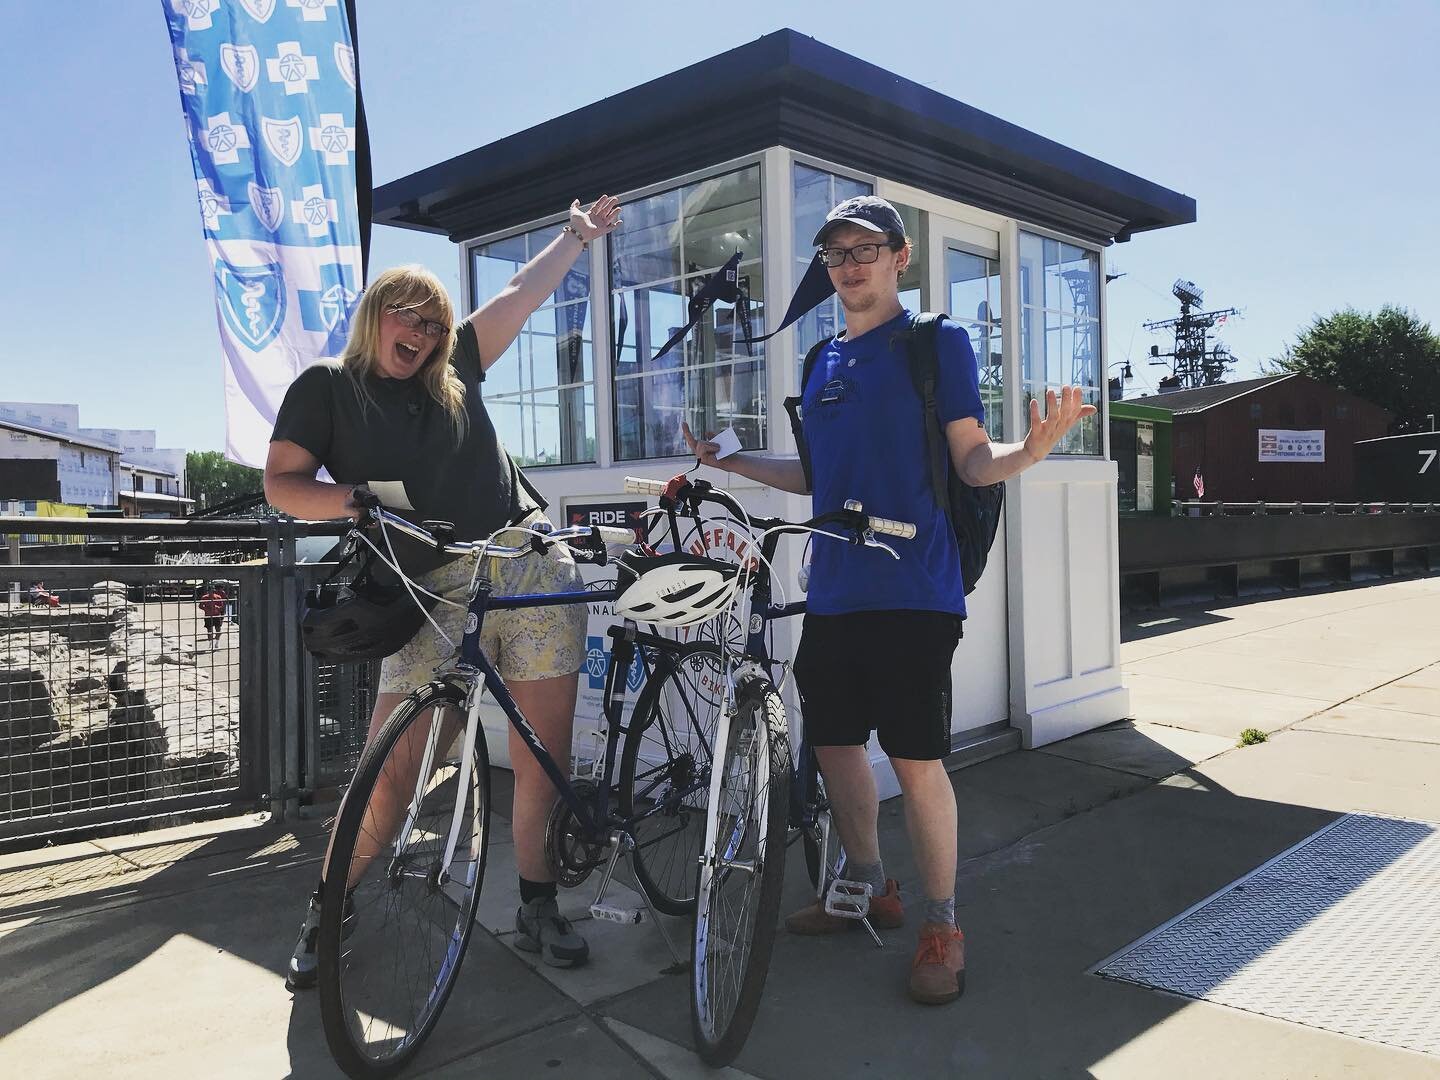 Book your bike rental and explore Buffalo by bicycle